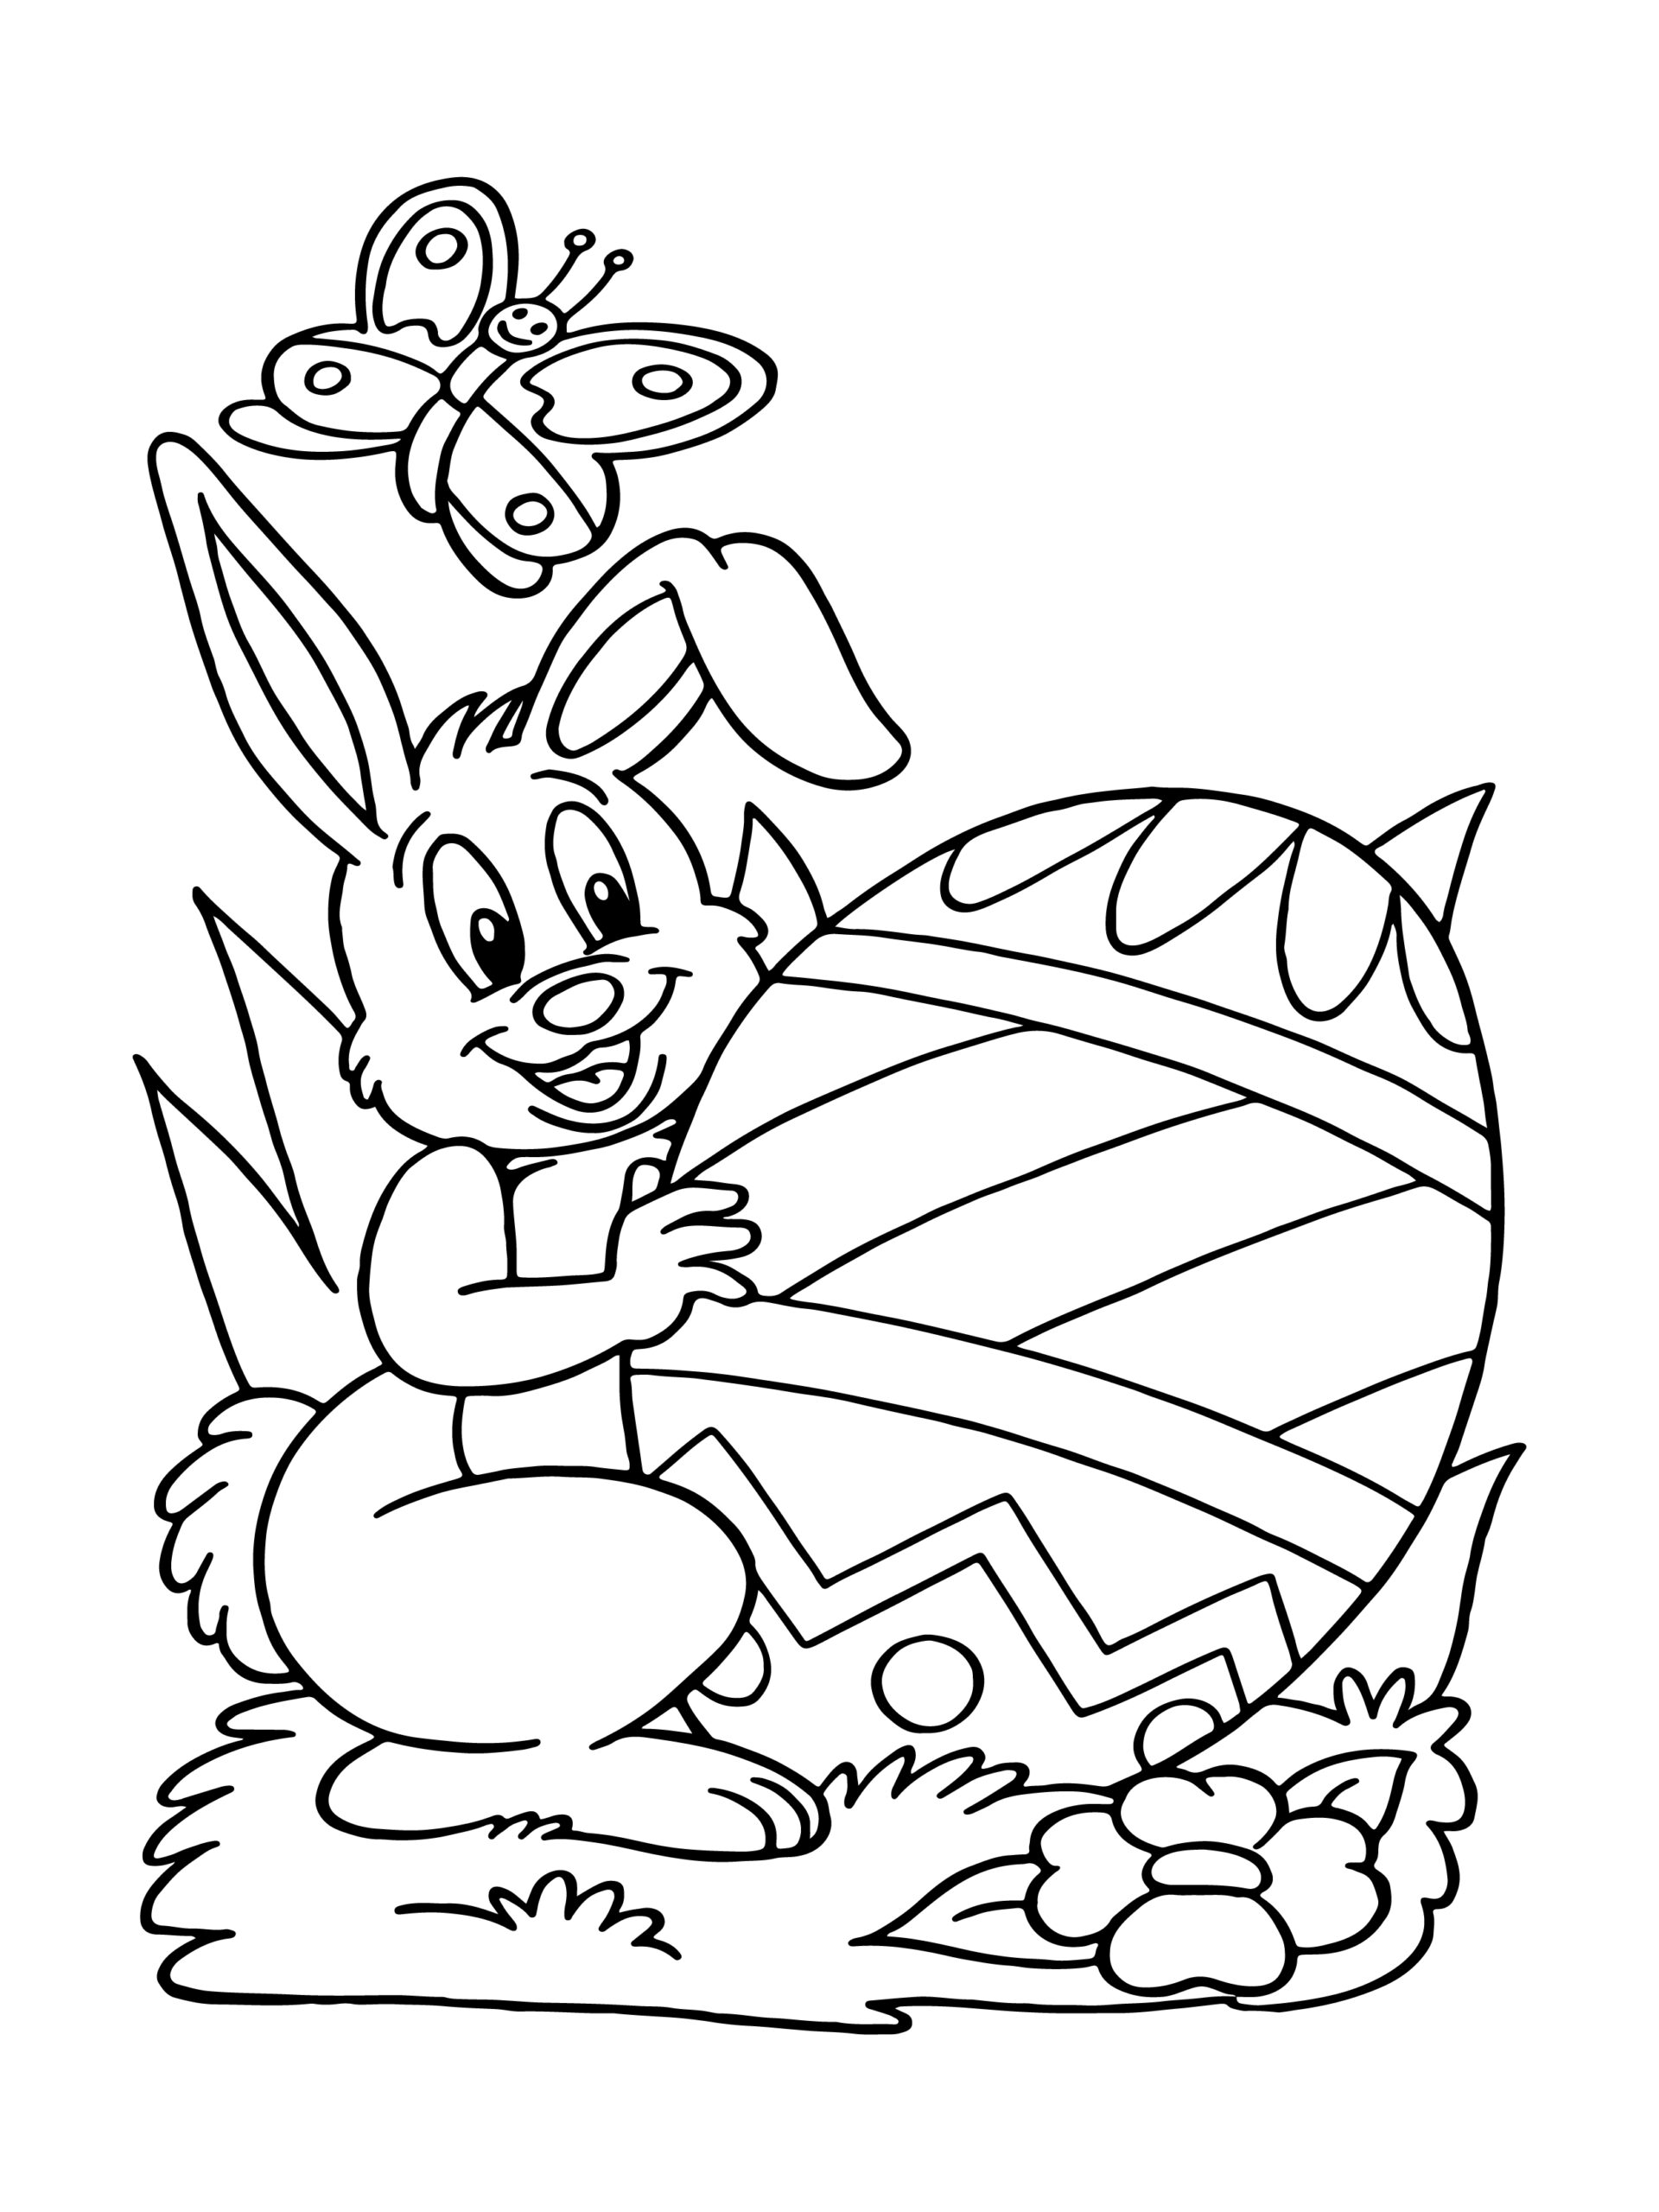 A (25) Coloring Page - Free Printable Coloring Pages for Kids